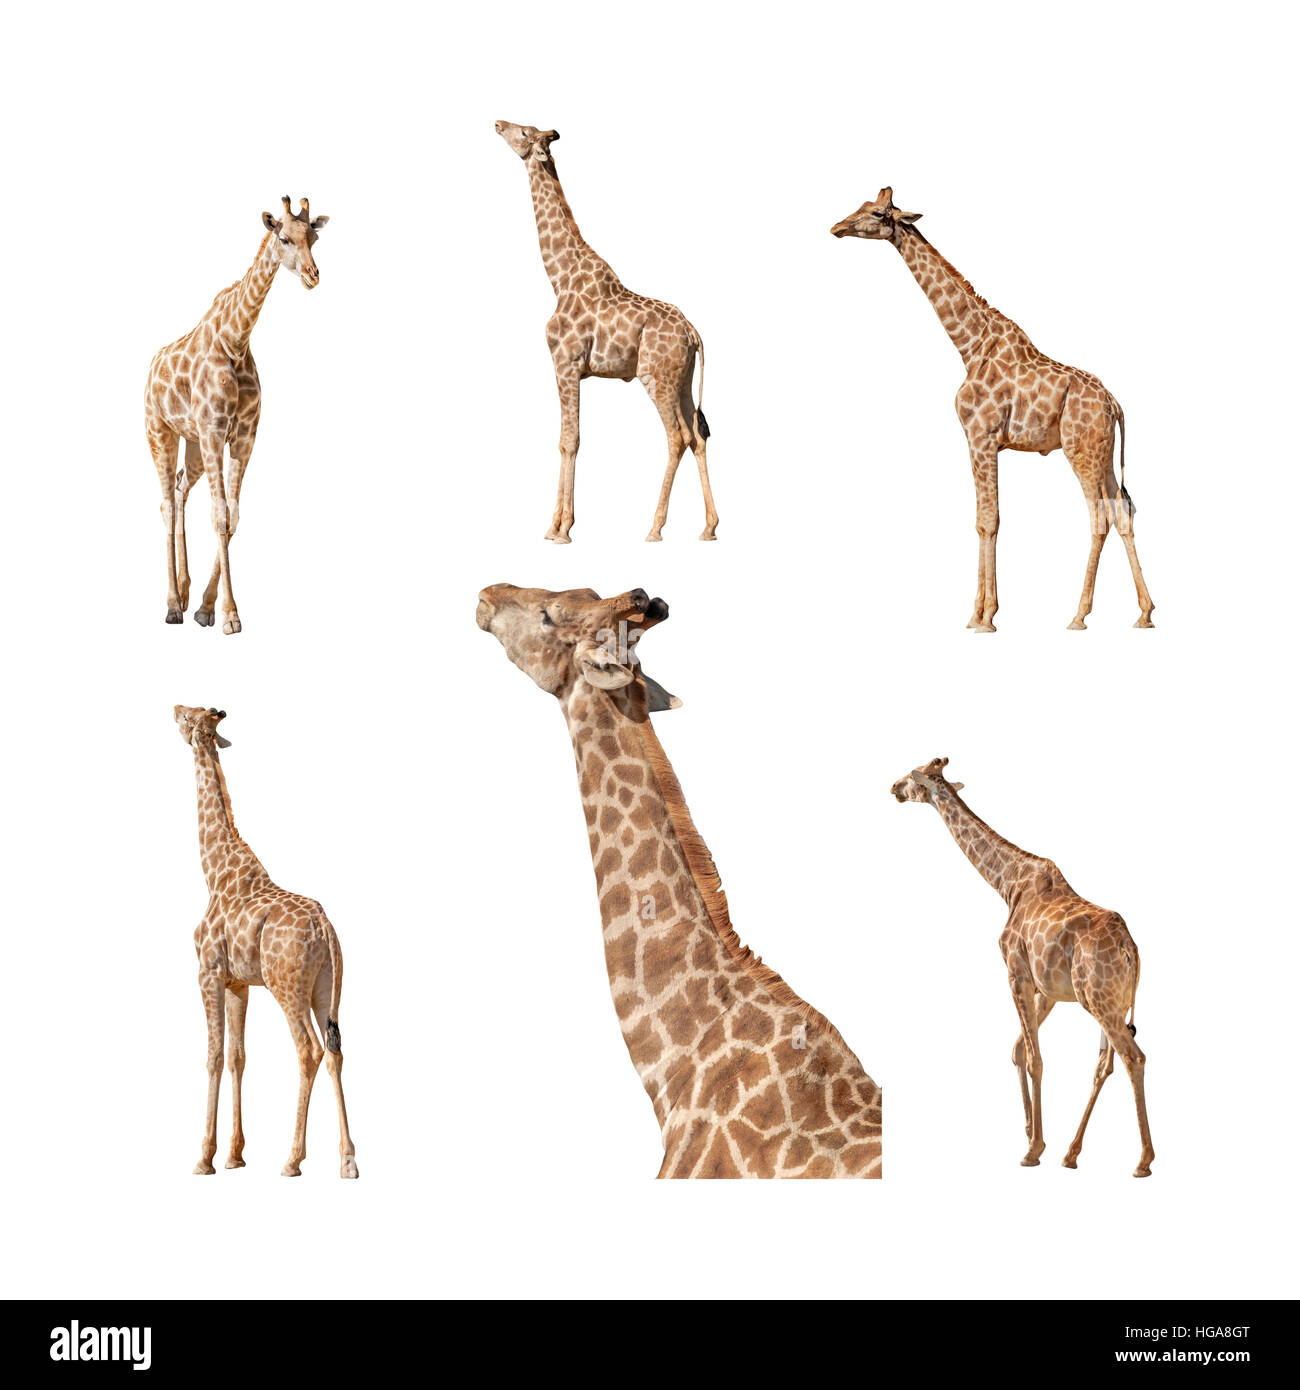 Giraffe isolated on a white background collection, pack or set. Profile, side, walking away, back view, coming, feeding. Stock Photo